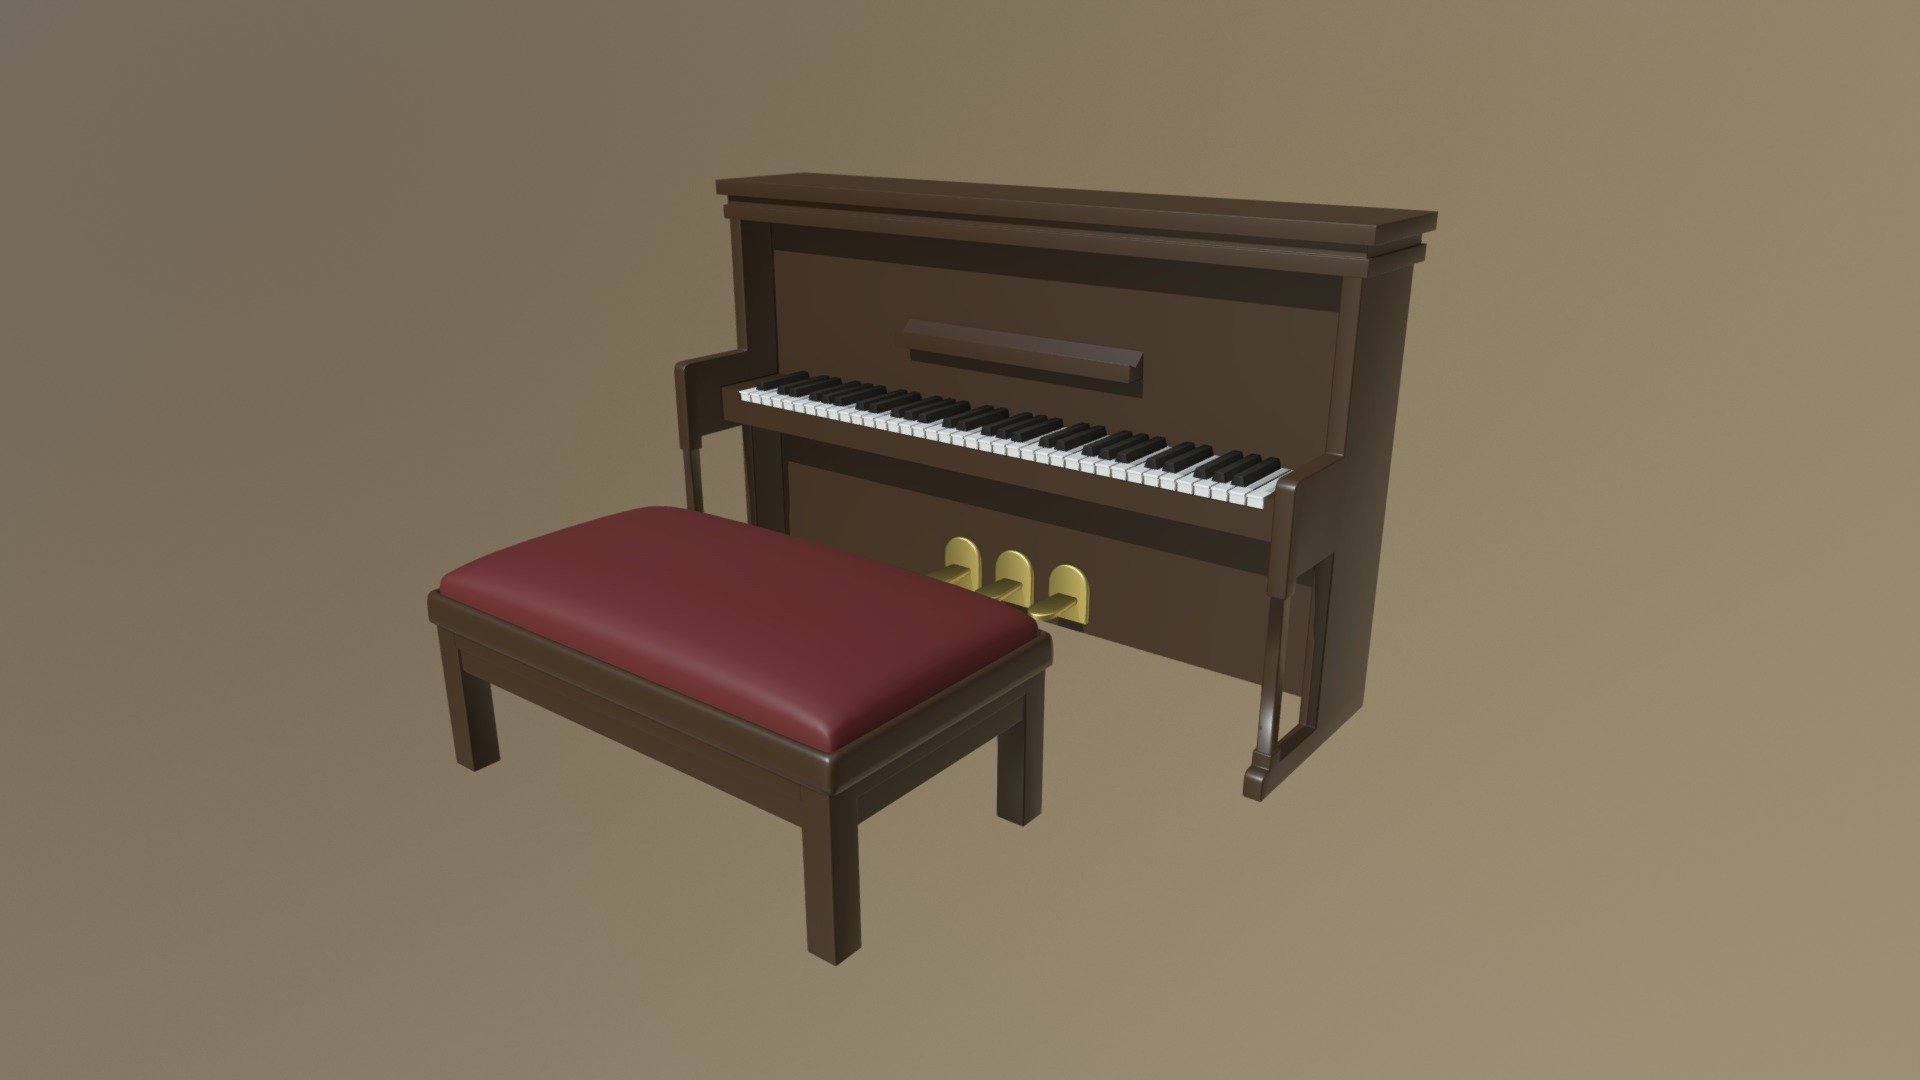 Church piano set that was created in Blender. This is a pack of the church piano and the church piano bench that can be found in the Church Asset Pack V2. This set is for people who may just want the piano and the piano bench from the asset pack and nothing else. These models use PBR textures and were made using the metalness workflow. Included with the models are several PBR textures that can easily be edited in photo editing software. You also get UVLayout maps to see how each model is divided and textured 3d model